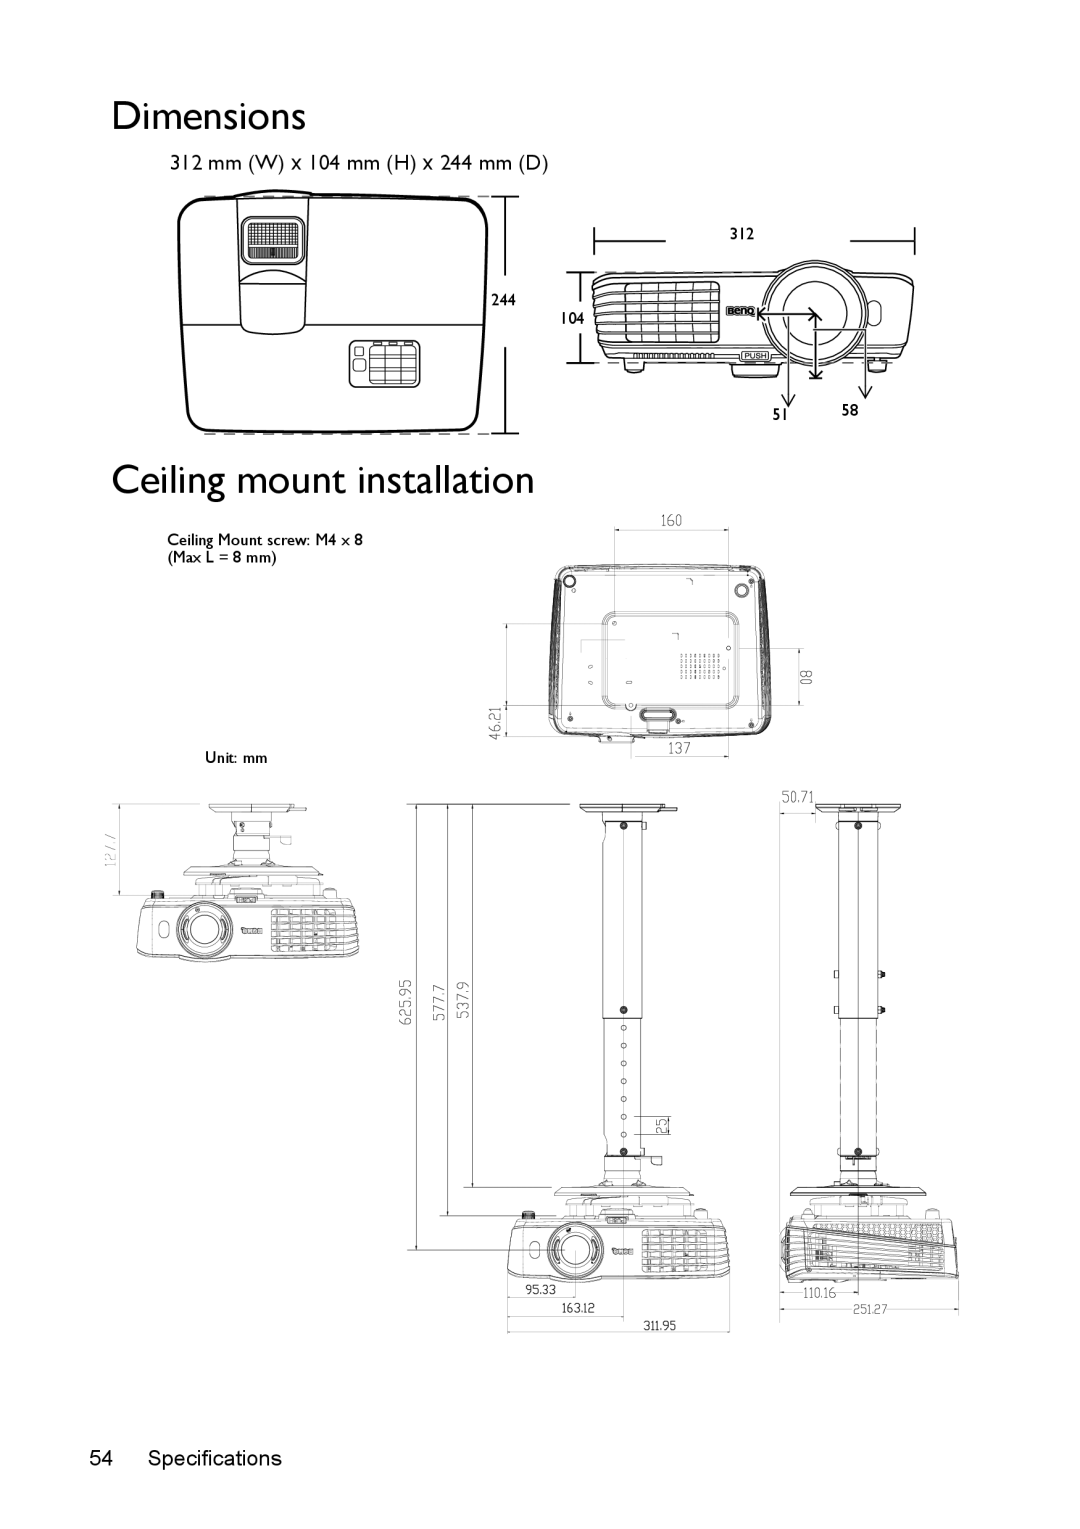 BenQ mx618st, ms616st user manual Dimensions, Ceiling mount installation, mm W x 104 mm H x 244 mm D, Specifications 